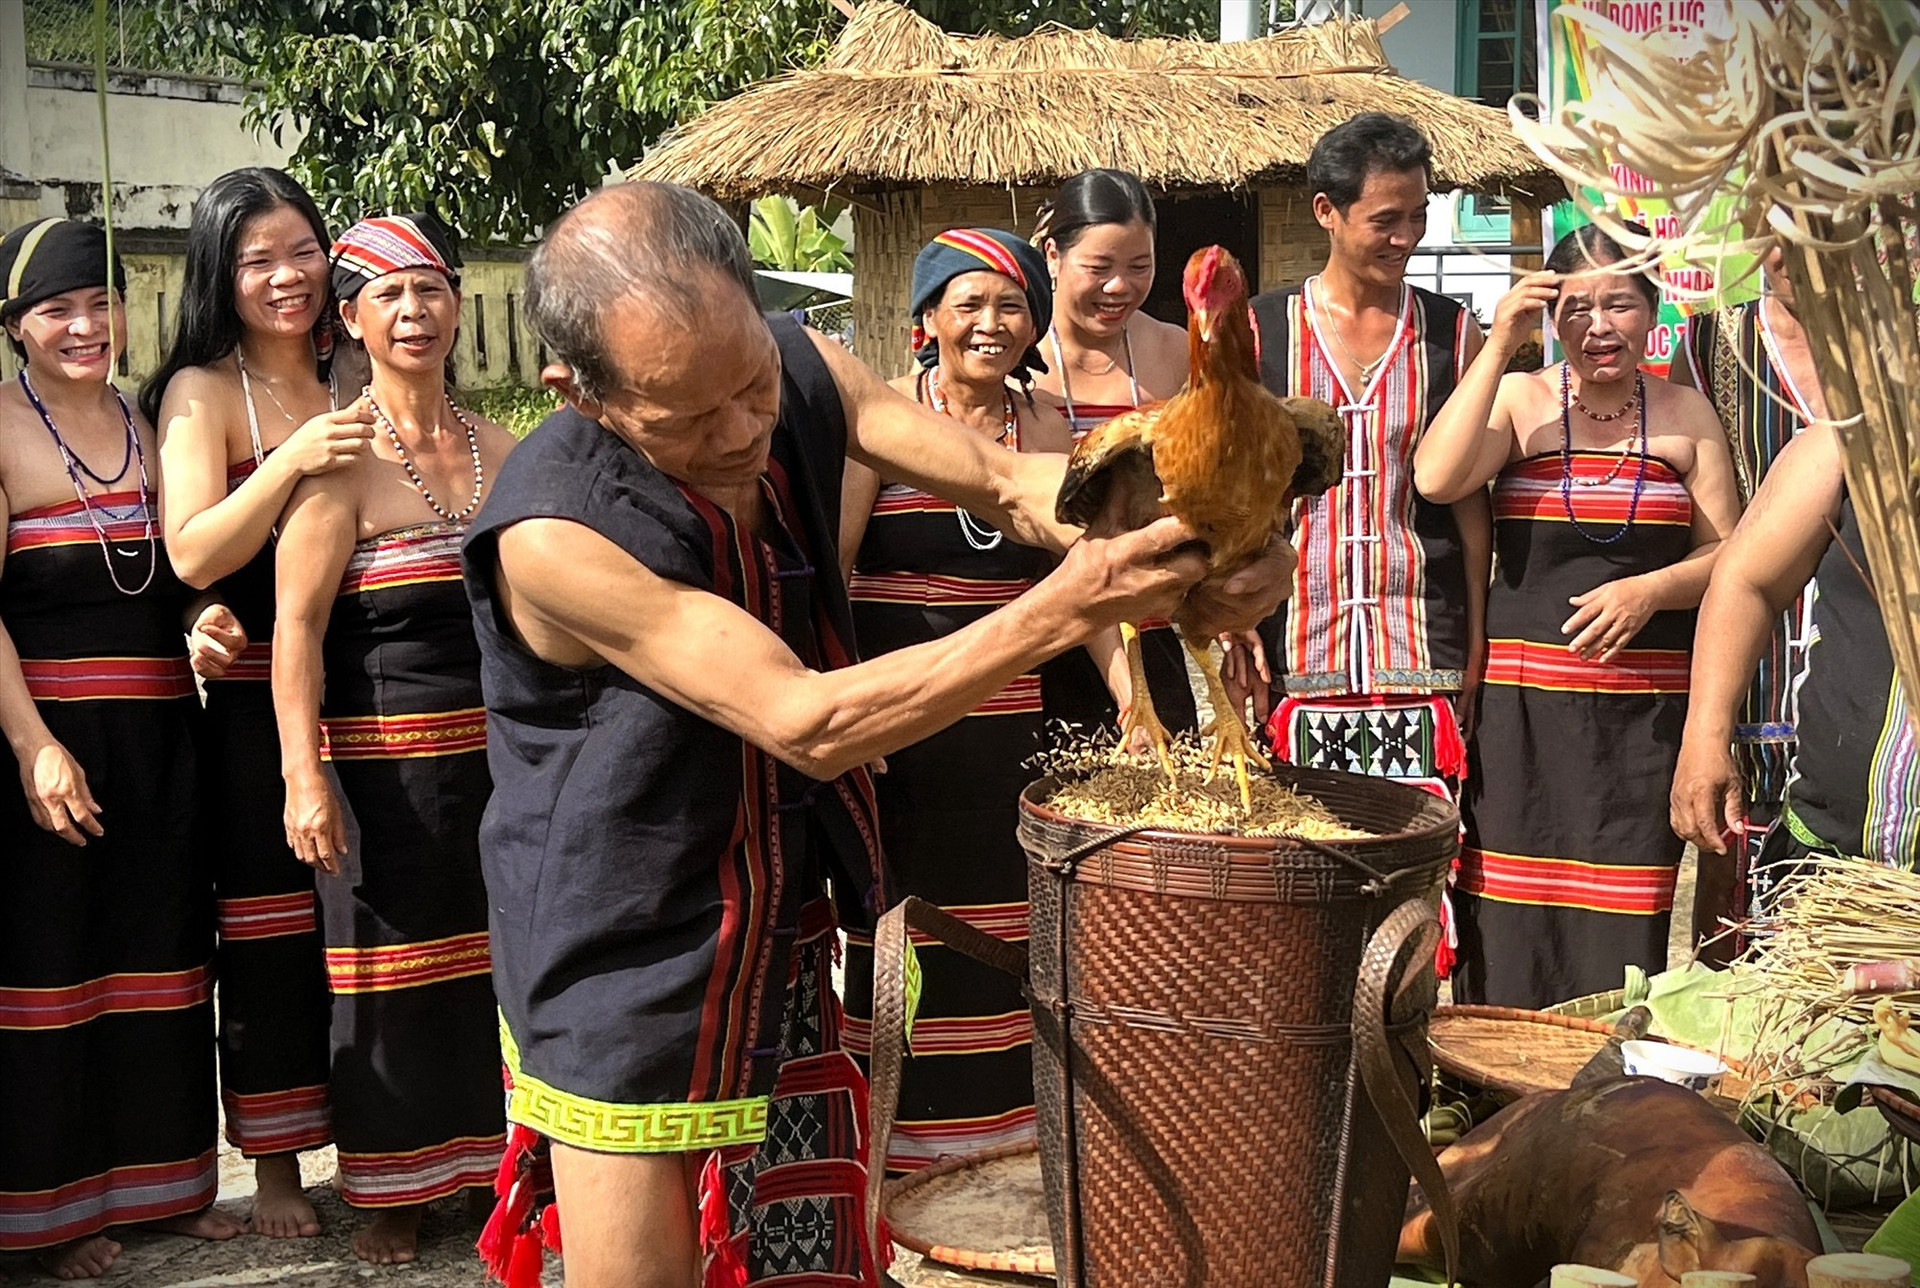 The village elder places a rooster on top of the rice offerings for blessings from the rice spirit.